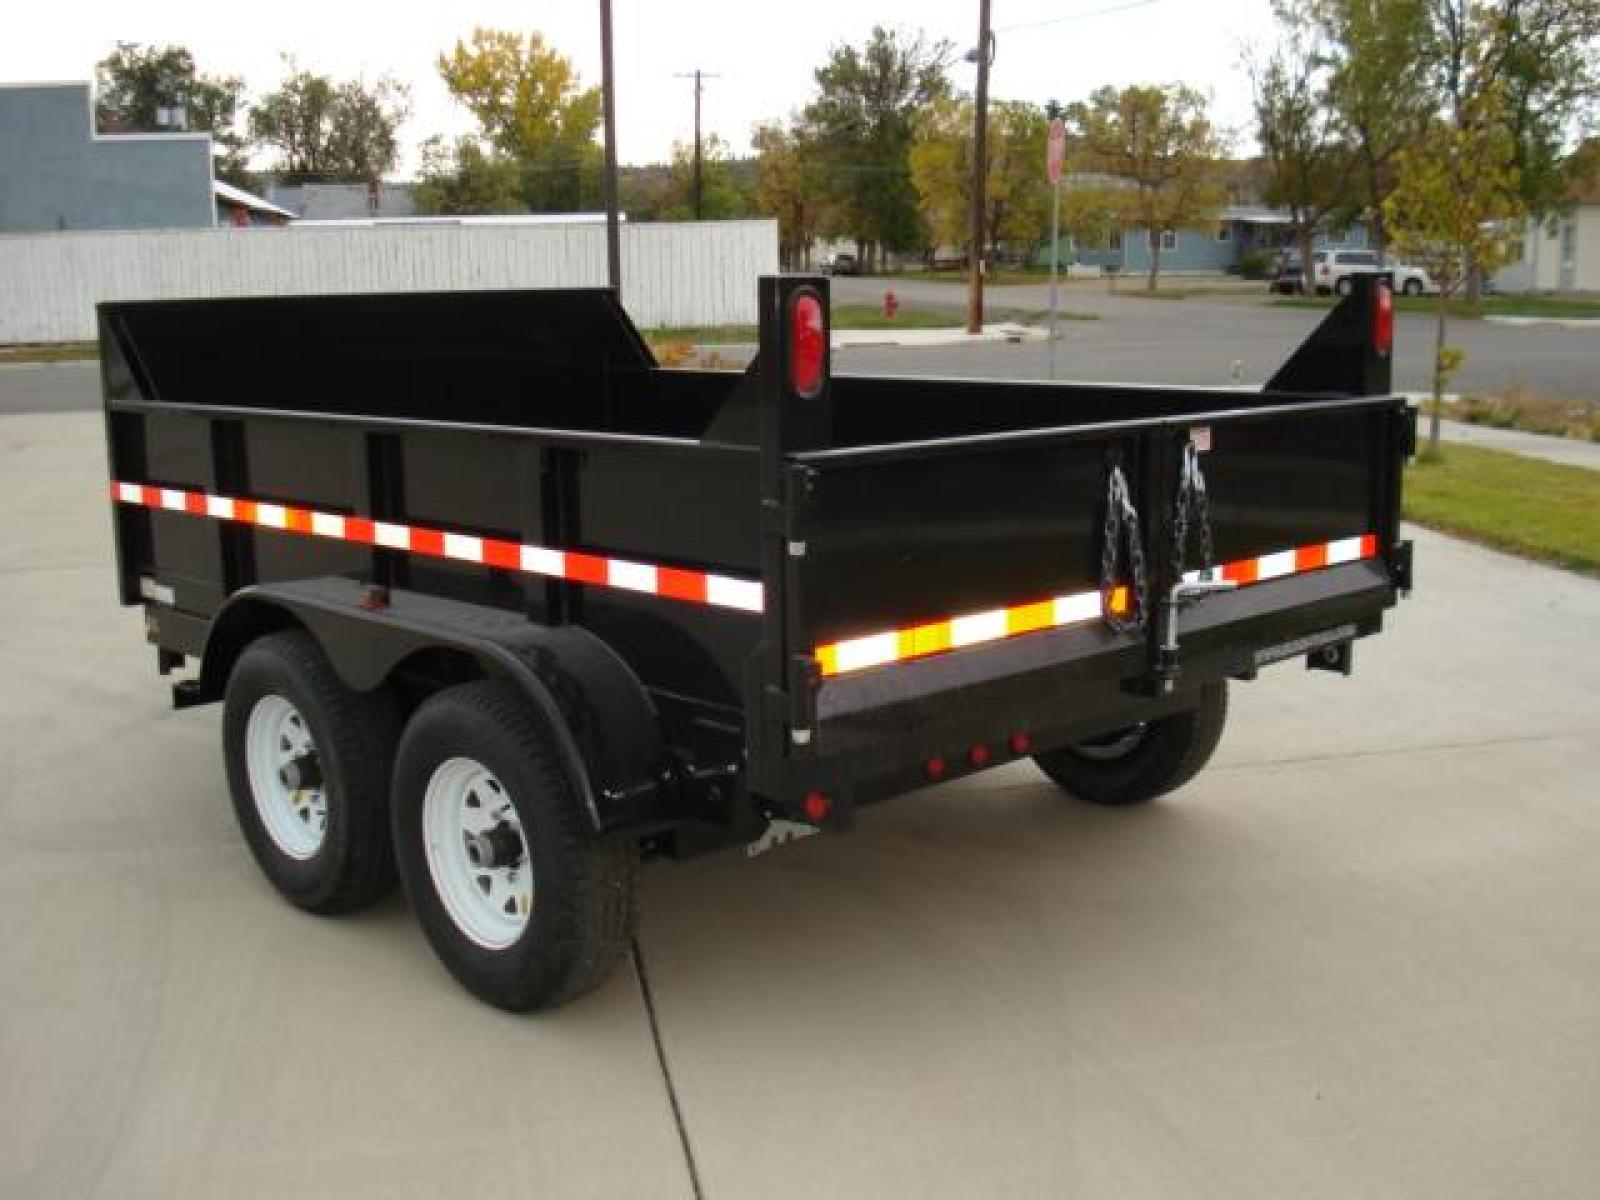 2022 Black SureTrac 6 x10 Lo Pro Dump Trailer , located at 310 West 1st Ave, Big Timber, MT, 59011, (406) 860-8510, 45.833511, -109.957809 - SURE-TRAC 6 X 10 LO PRO DUMP TRAILER, 10K GVW, SINGLE RAM HOIST, EZ LUBE HUBS, DUAL REAR GATE, BRAKES BOTH AXLES, EZ LUBE HUBS, (5) D-RING TIE-DOWNS, LED LIGHTS, POWDER COAT FINISH, REAR RAMPS, MESH TARP, DEEP CYCLE BATTERY. OPTIONS: SPARE TIRE $165.00. THE BEST TRAILERS AT THE BEST PRICE!!! - Photo #2